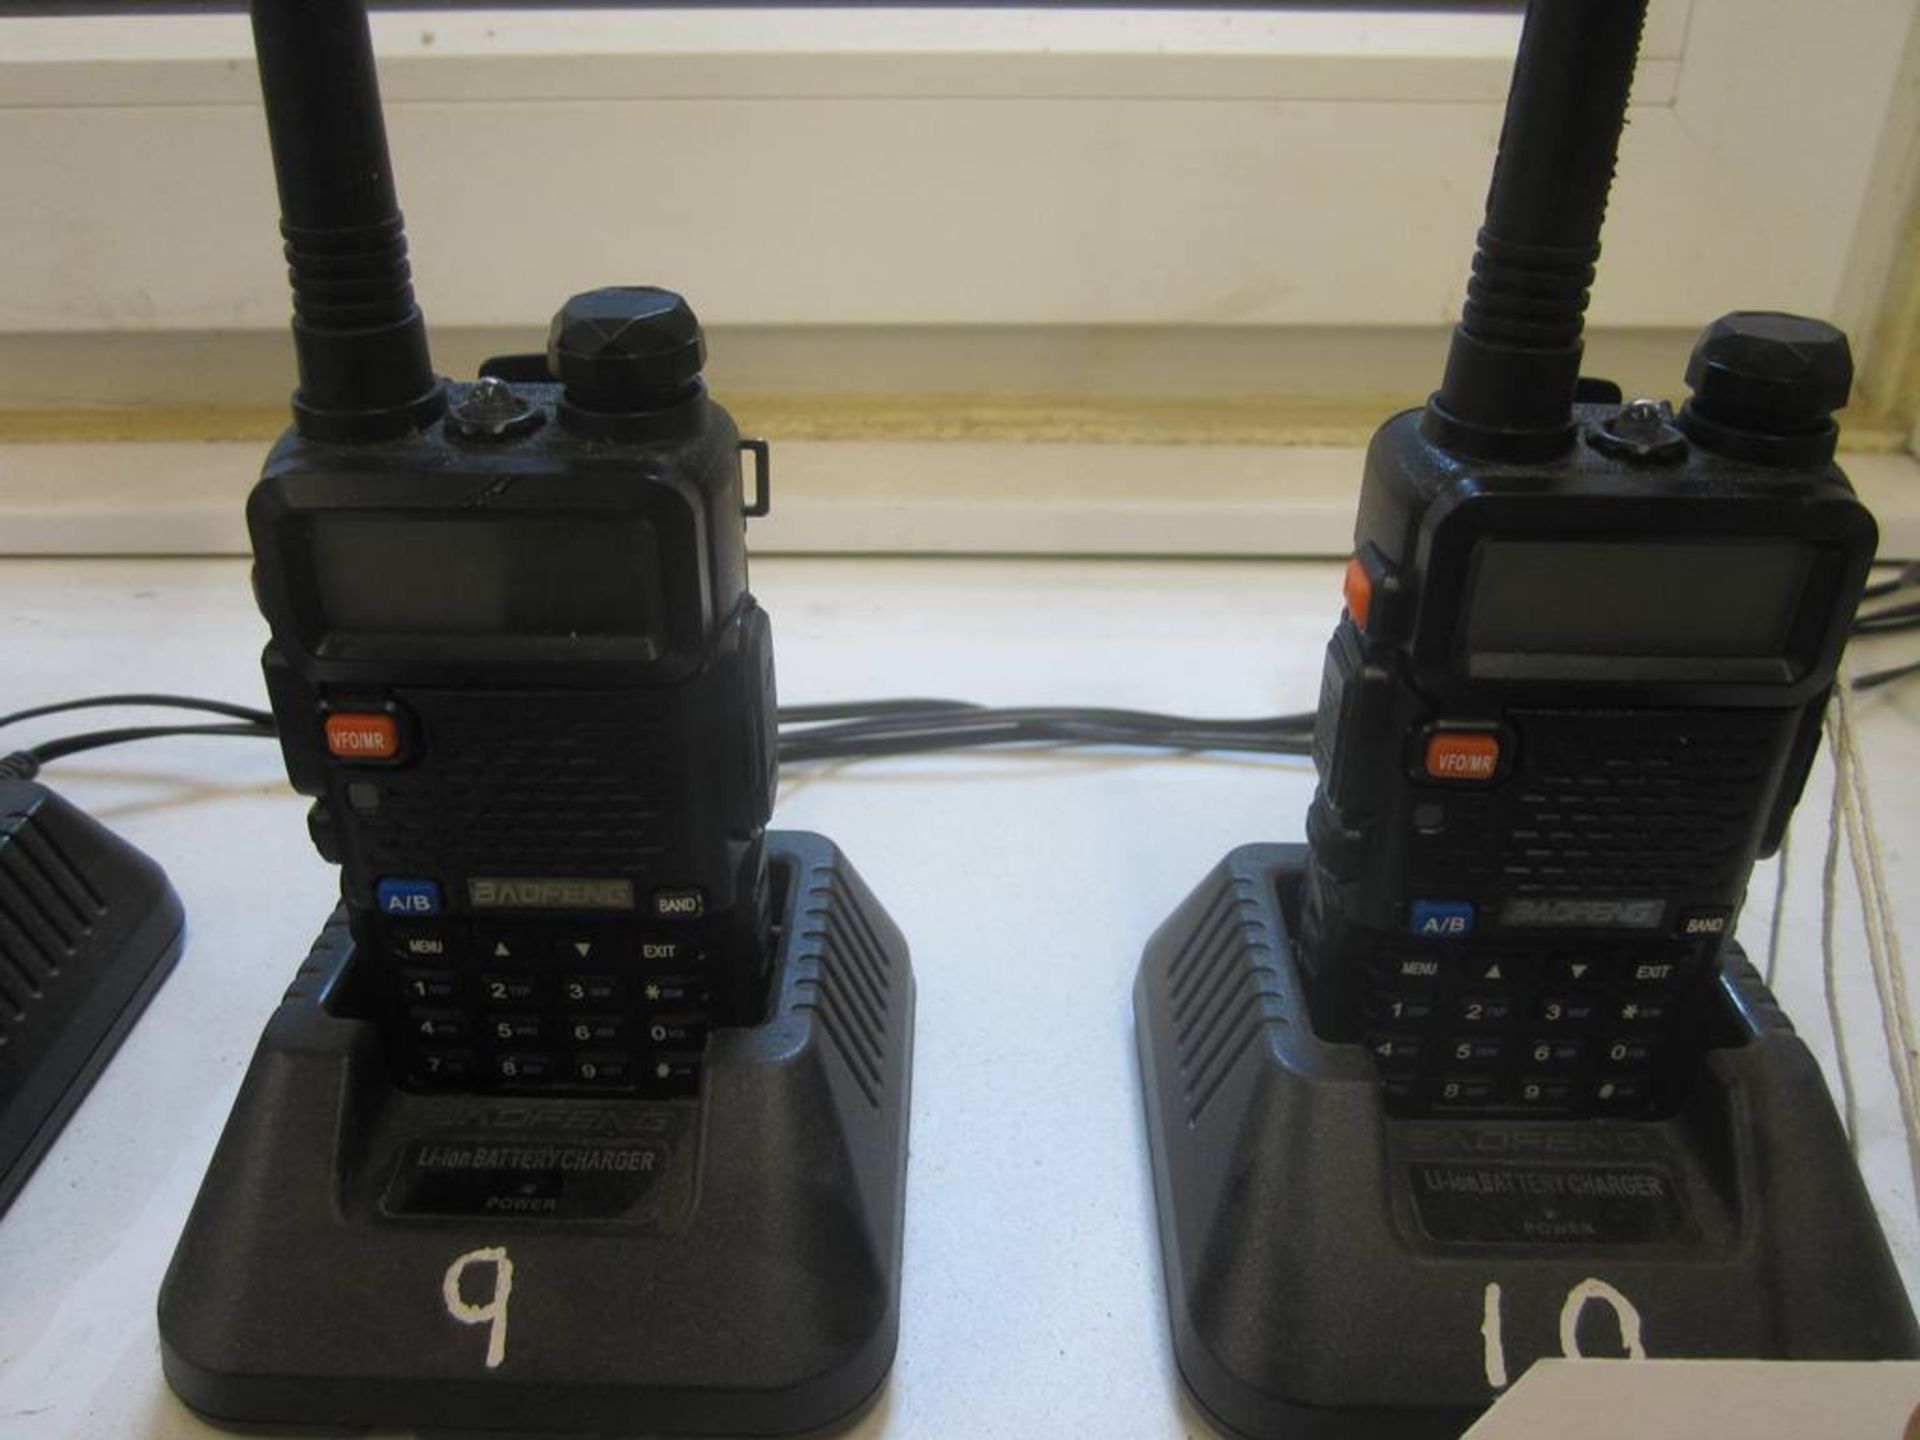 Two Boafeng UV-5R 2-way radio sets and charging stations